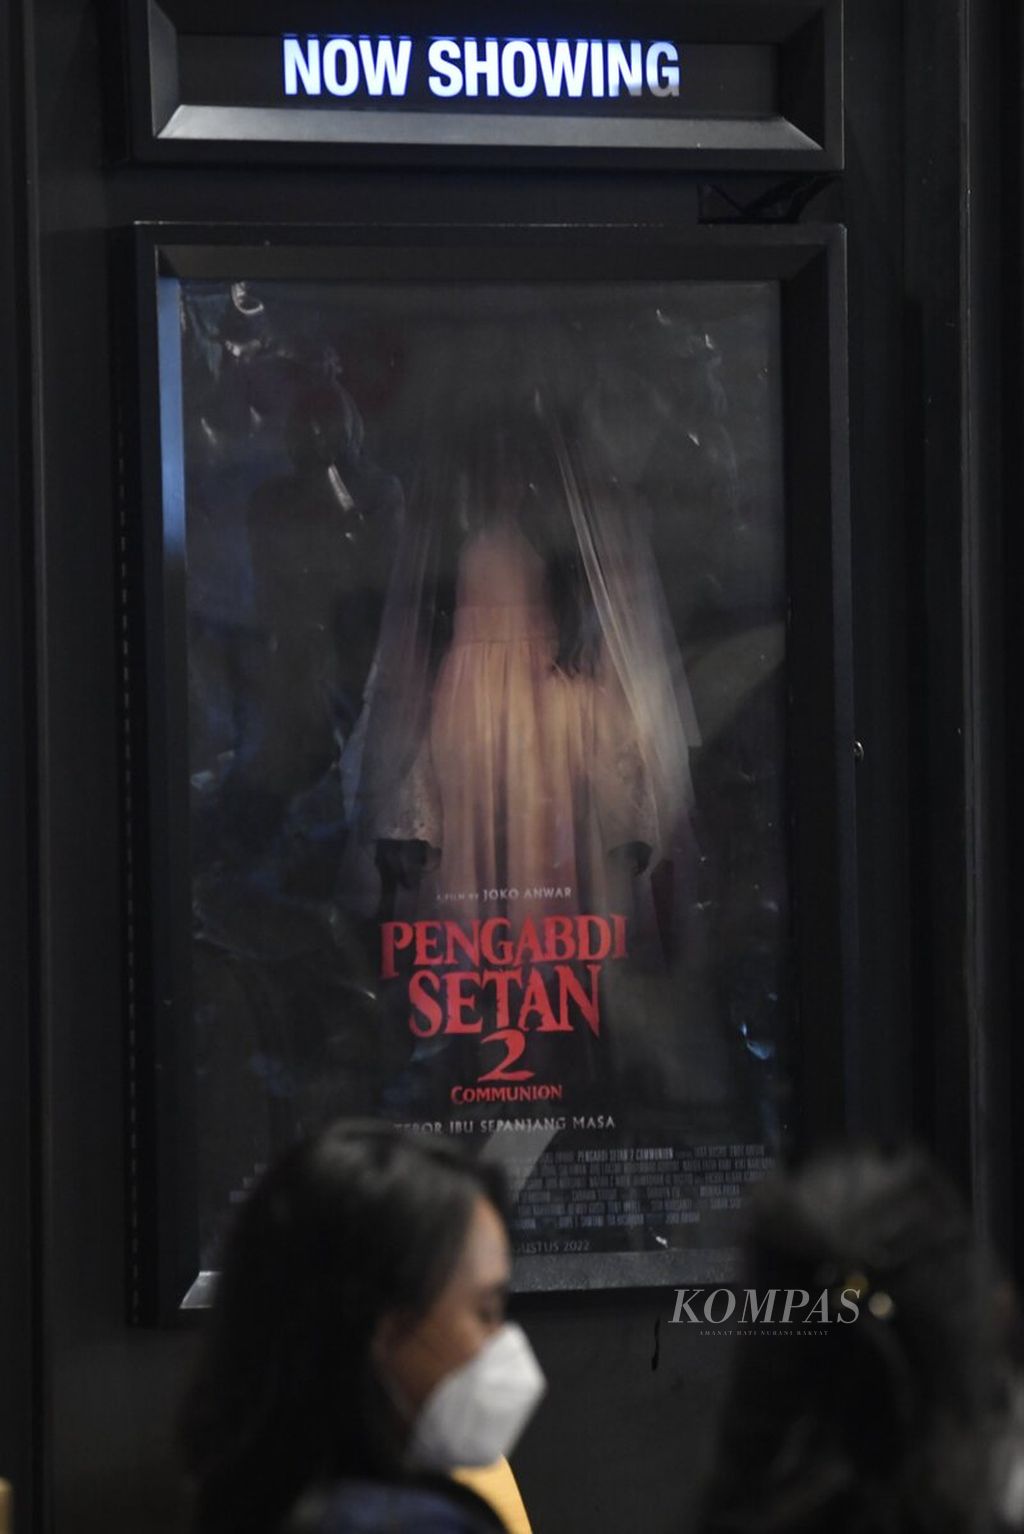 The movie poster of Pengabdi Setan 2: Communion was displayed at the CGV Grand Indonesia cinema in Jakarta on Thursday (4/8/2022). Directed by Joko Anwar, the film premiered in cinemas across Indonesia on August 4, 2022.